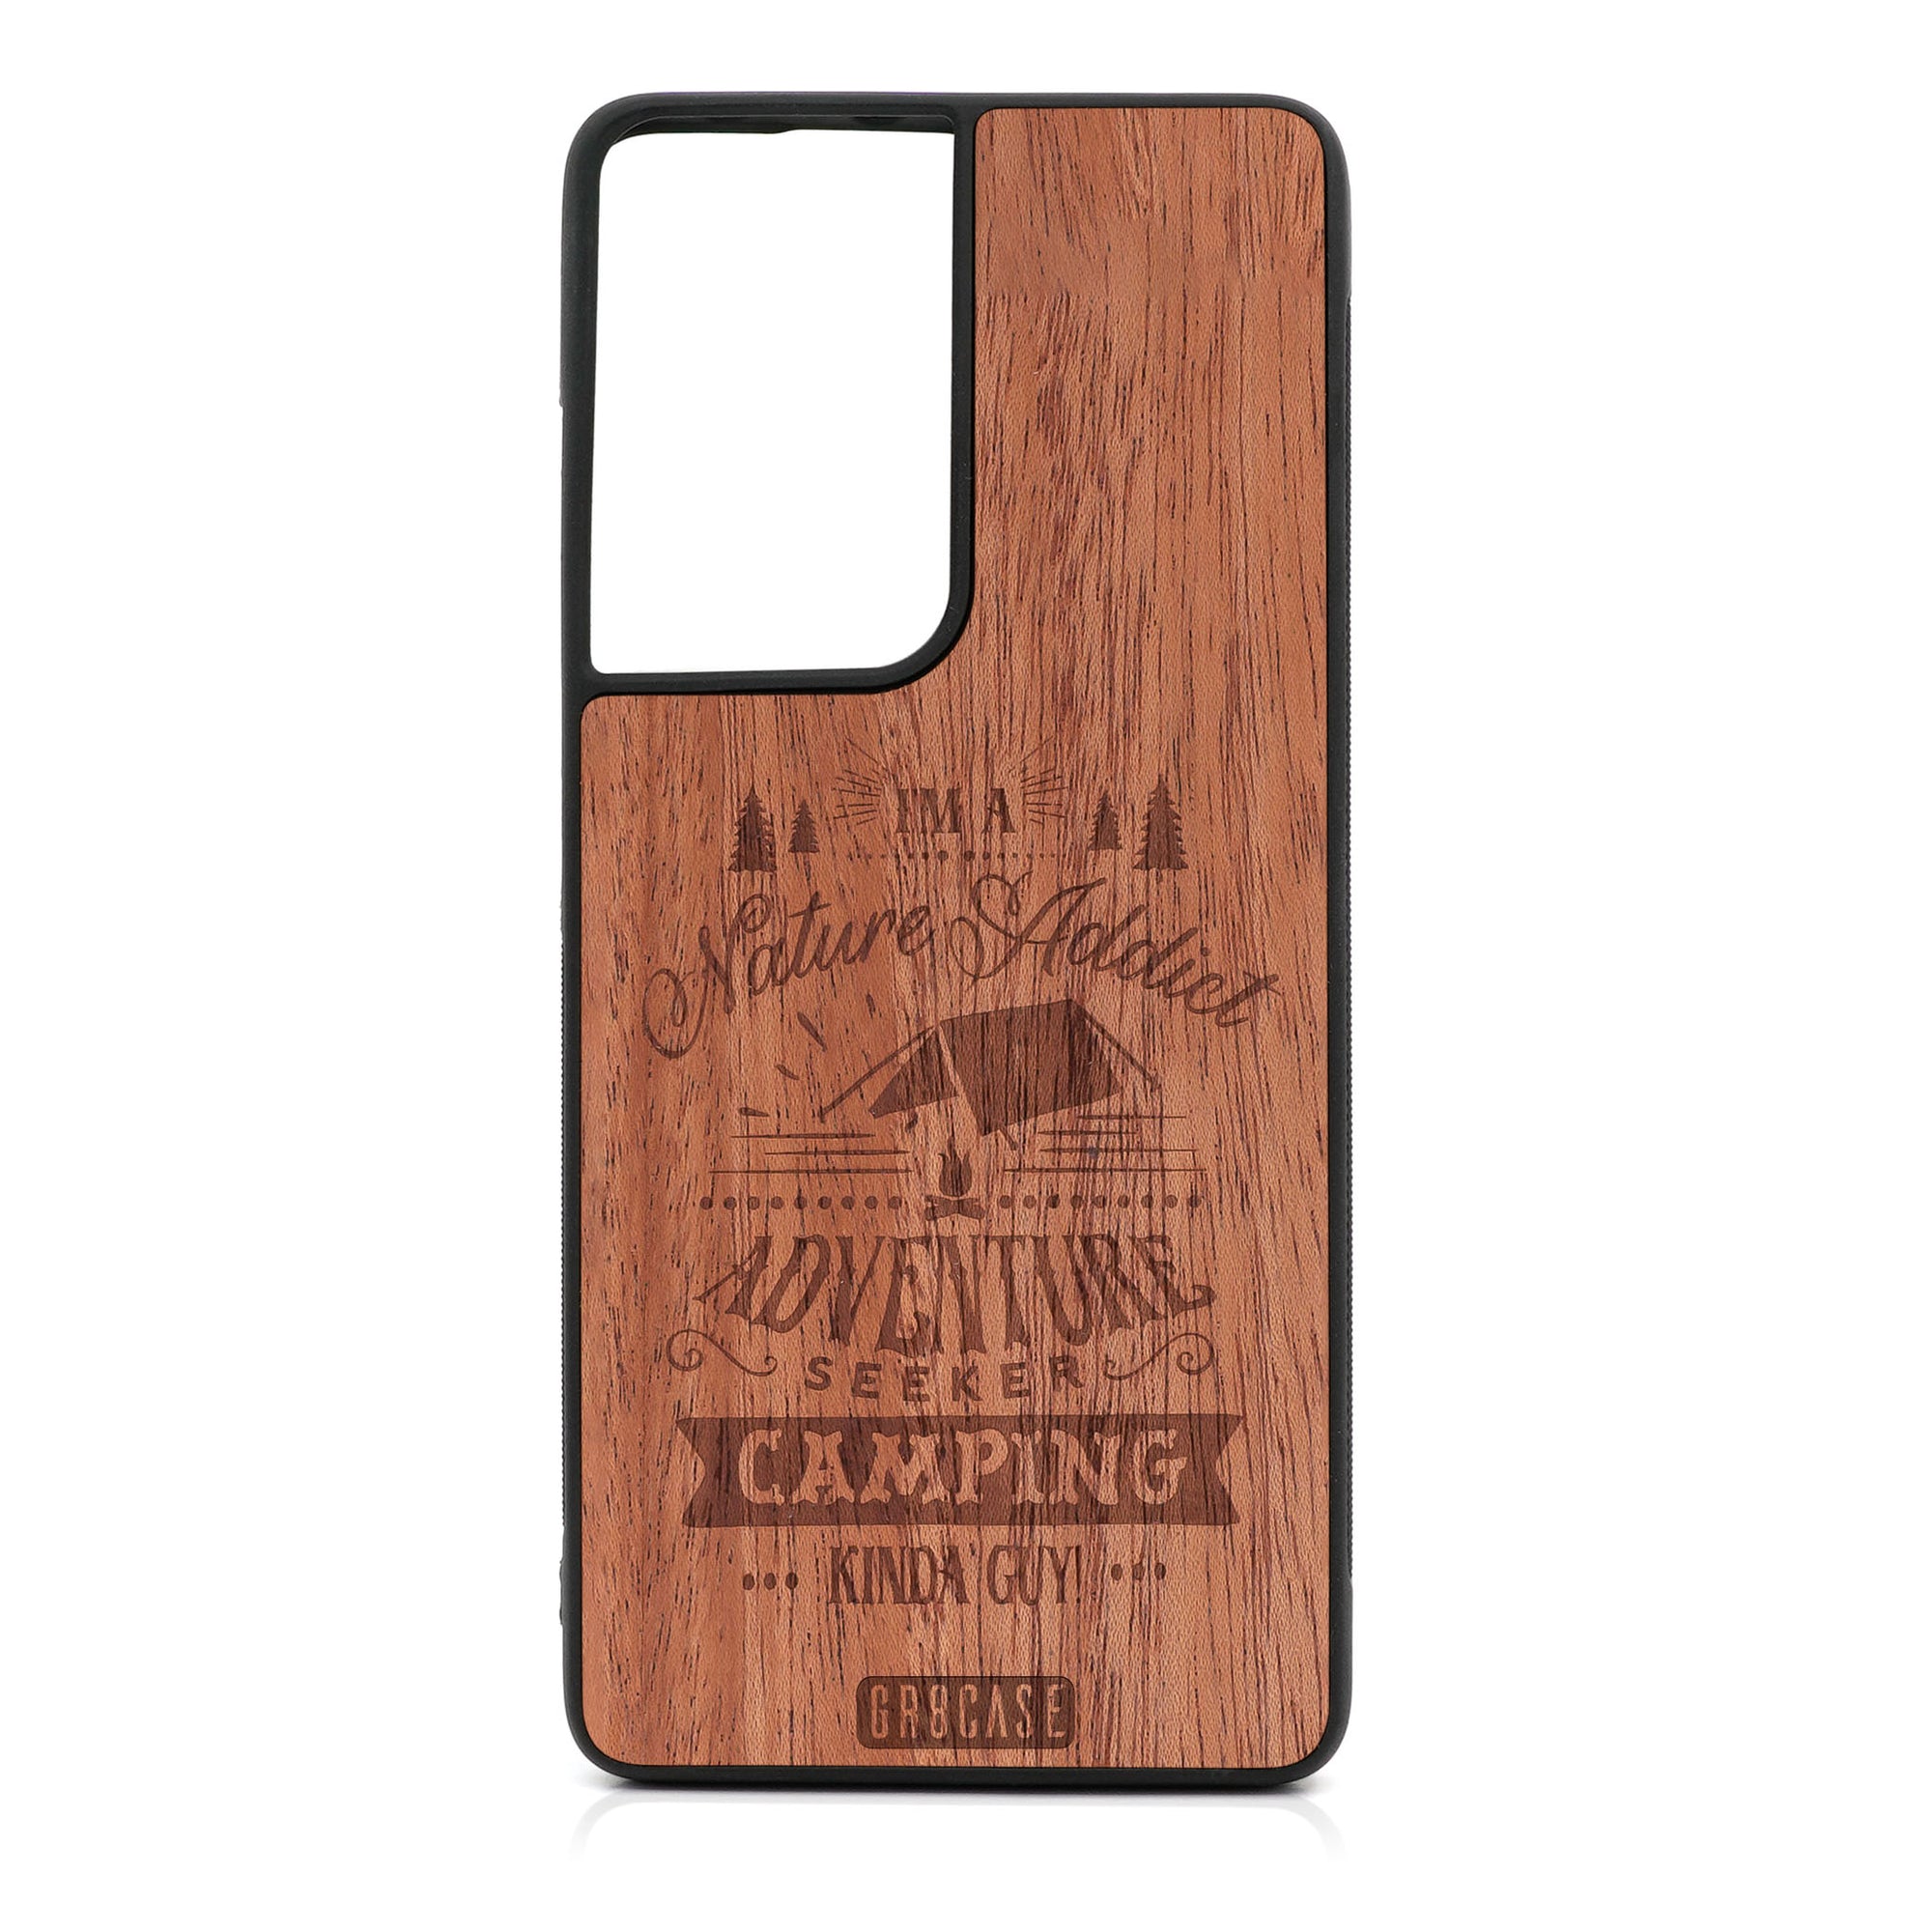 I'm A Nature Addict Adventure Seeker Camping Kinda Guy Design Wood Case For Samsung Galaxy S21 Ultra 5G